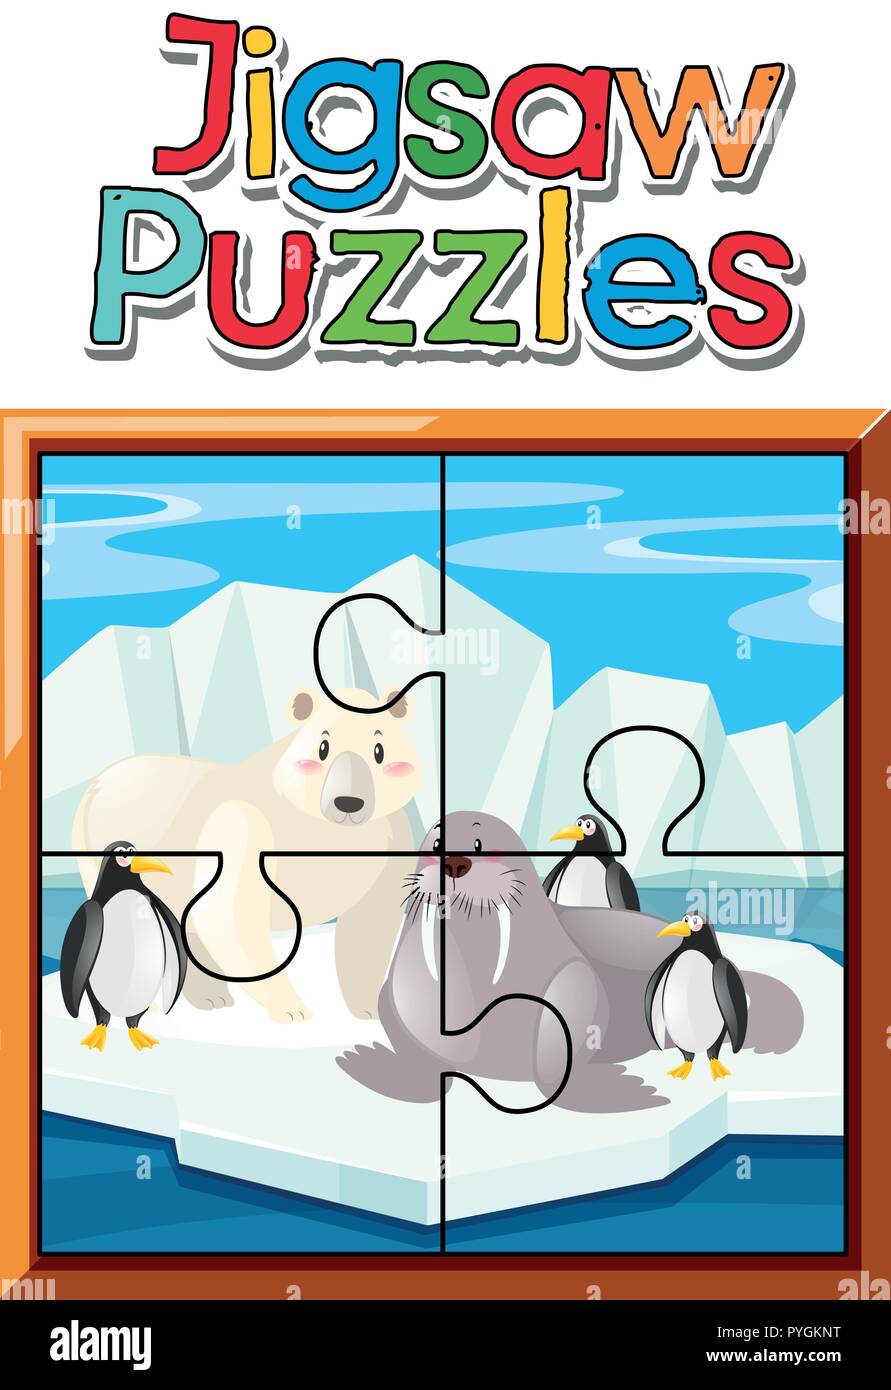 Jigsaw puzzle pieces of animals in northpole illustration Stock Vector